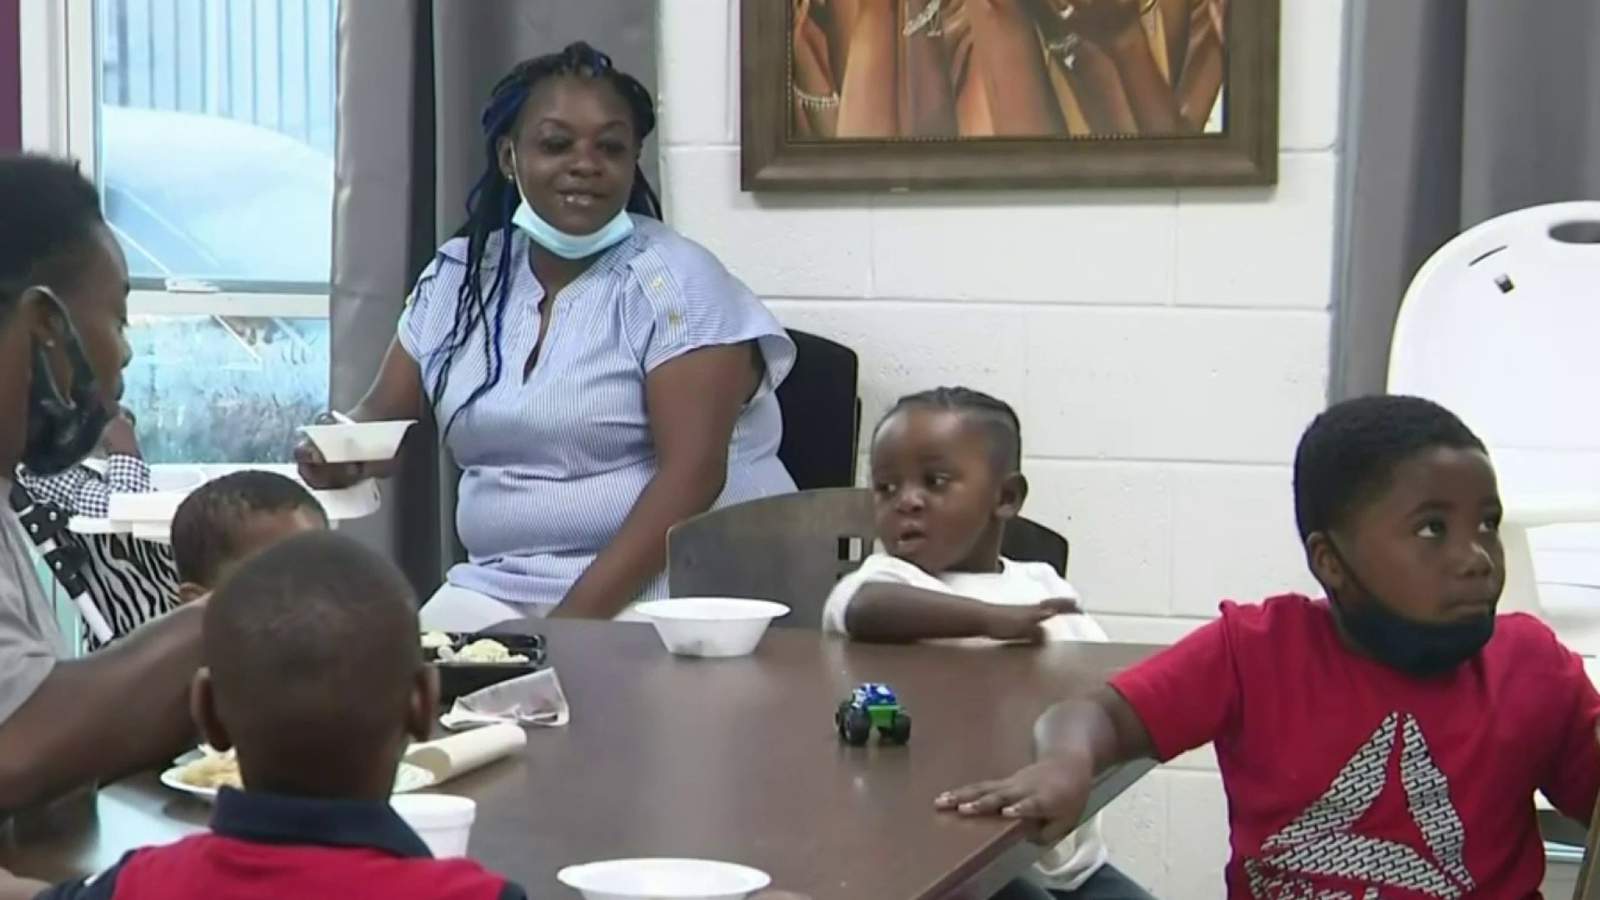 Detroit Rescue Mission gets national attention: A look inside